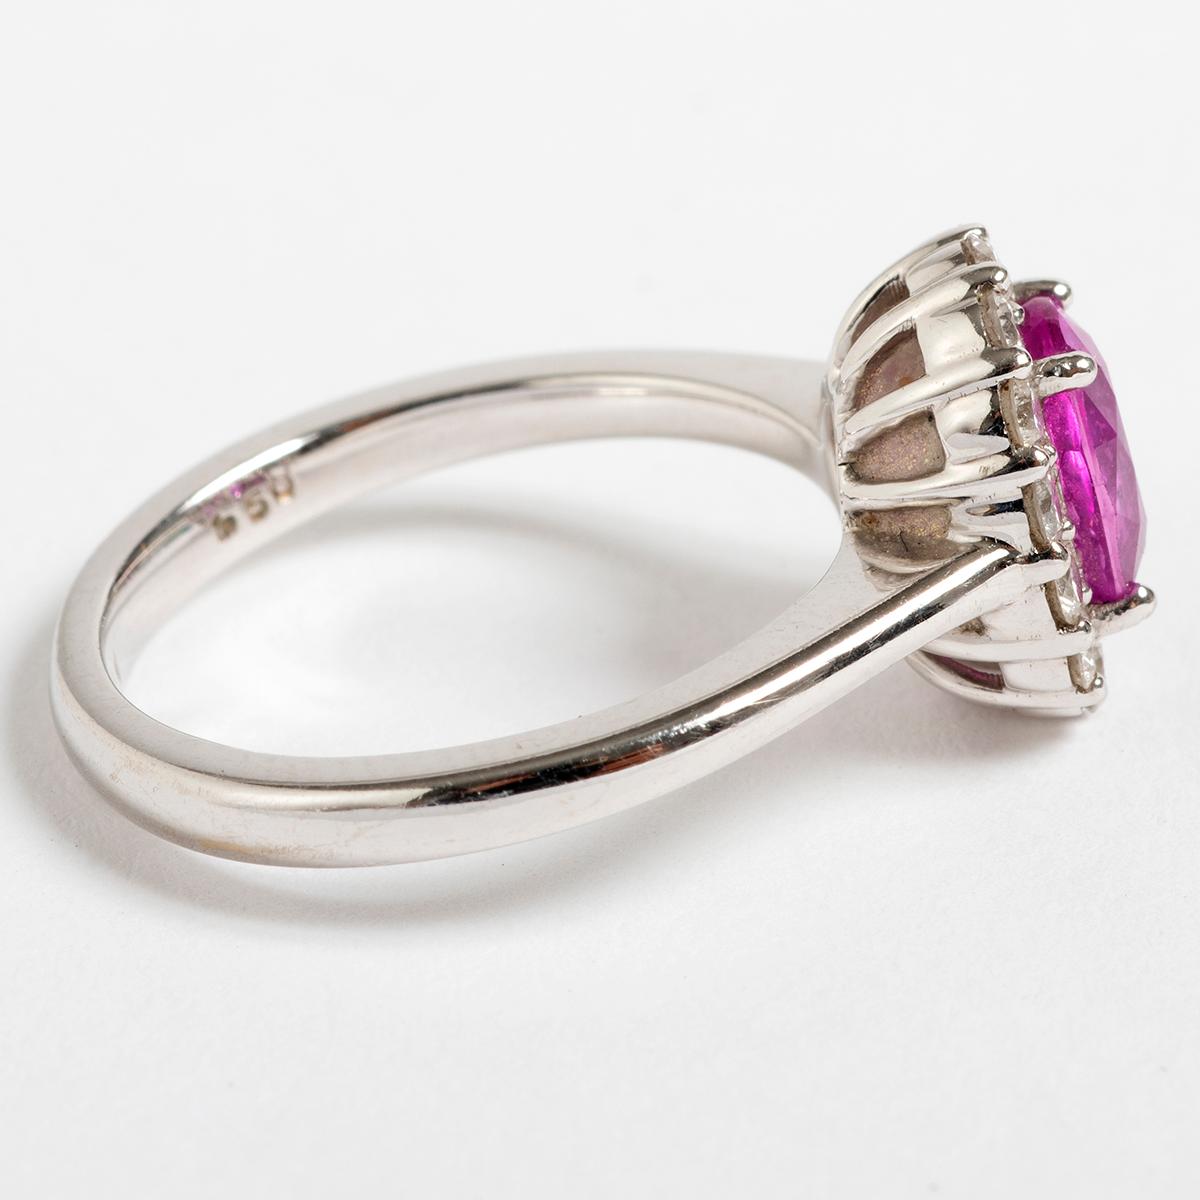 Our very pretty cluster ring features a large pink sapphire of est .5ct and is surrounded by fourteen diamonds est combined .5ct of 1st. SI2, set in and on a 18k white gold band. The ring size is 6.25 (US) M (UK). A perfect statement piece.